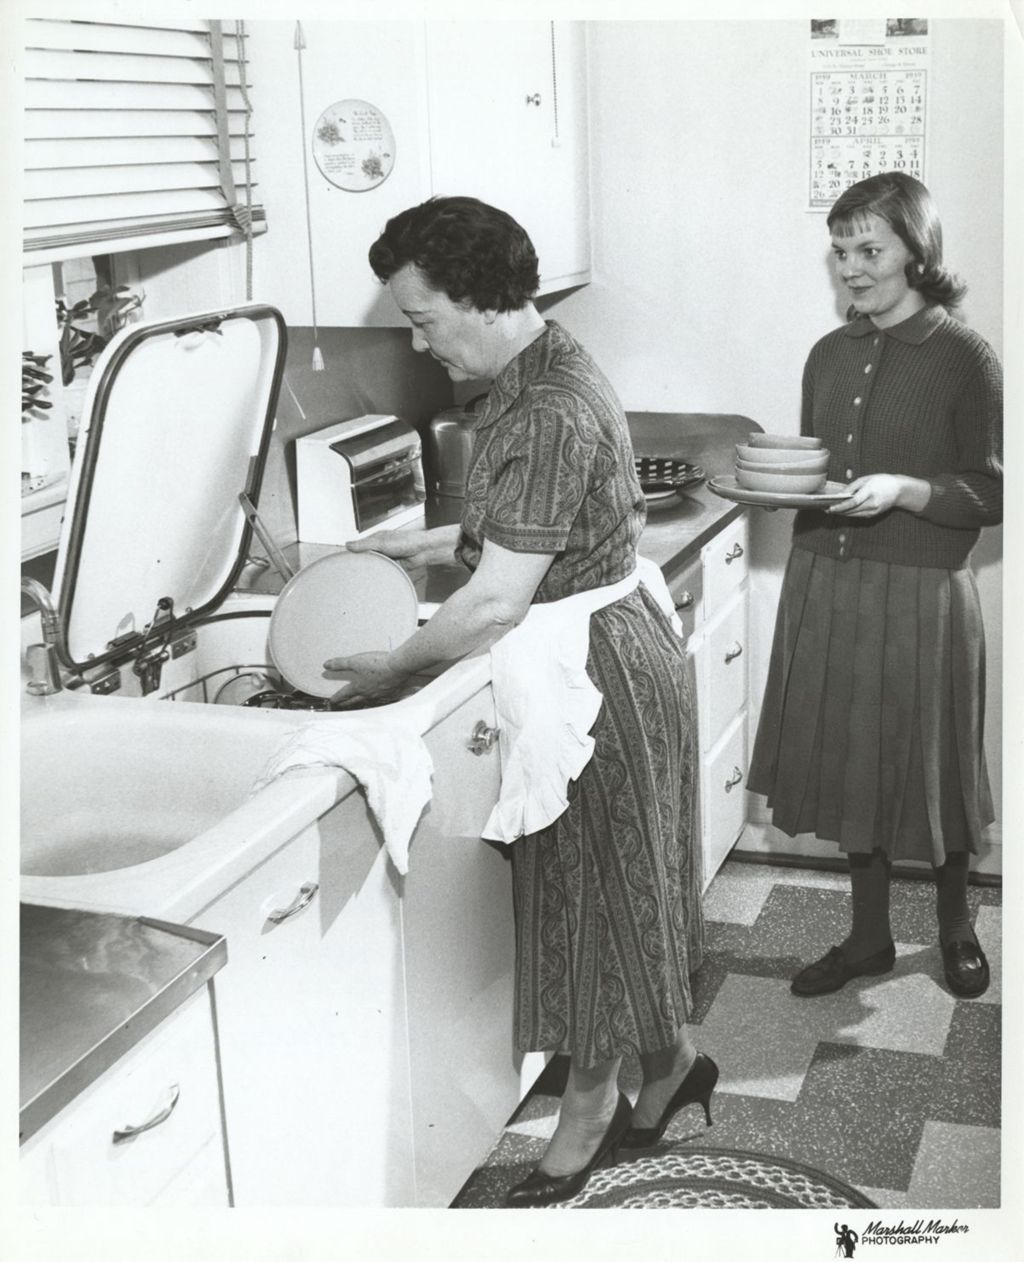 Eleanor Daley loading a dishwasher with Patricia Daley